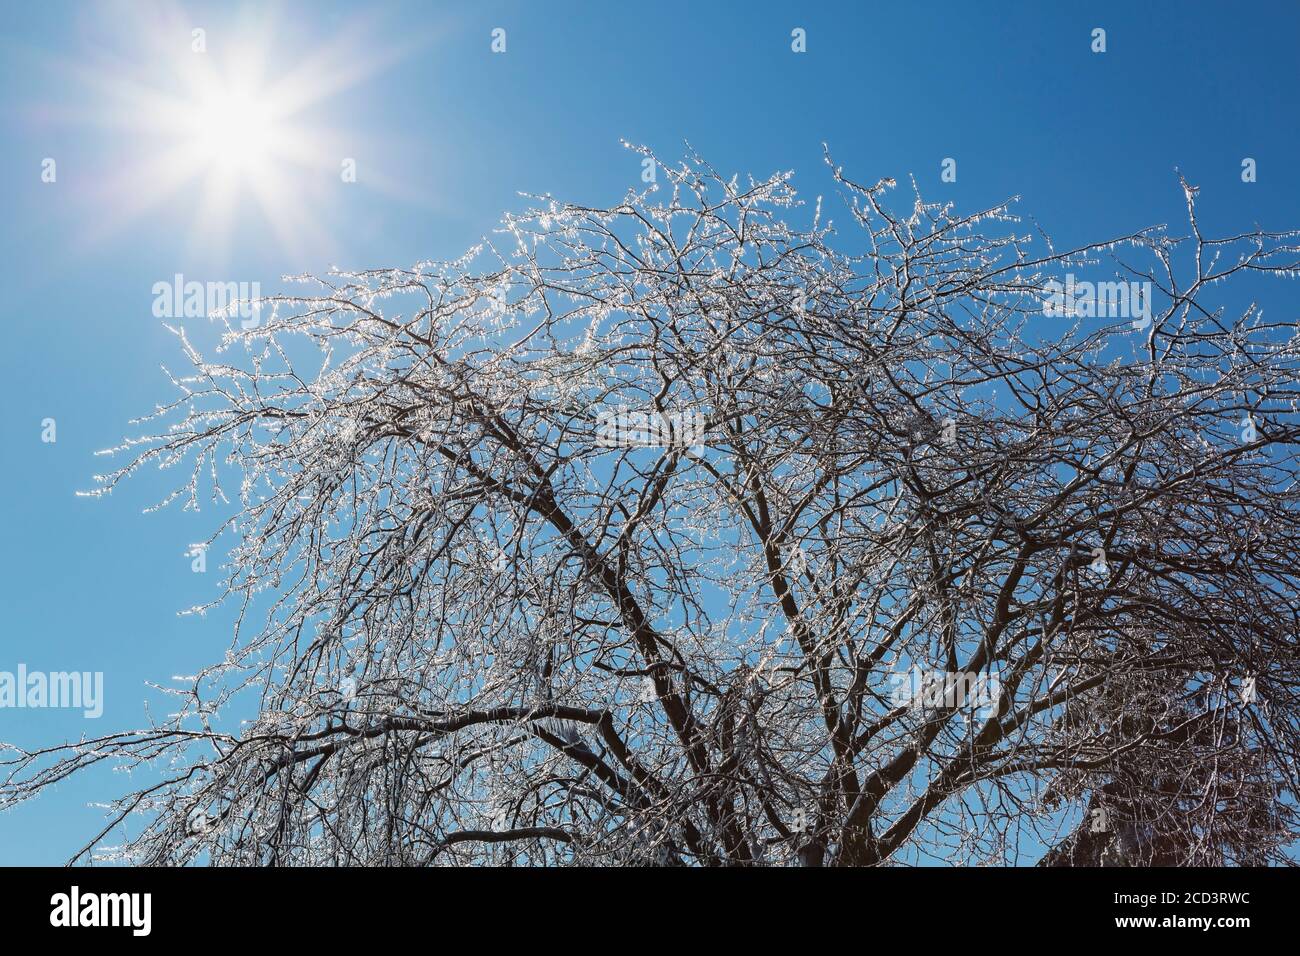 Deciduous tree after ice storm in early spring against blue sky. Stock Photo